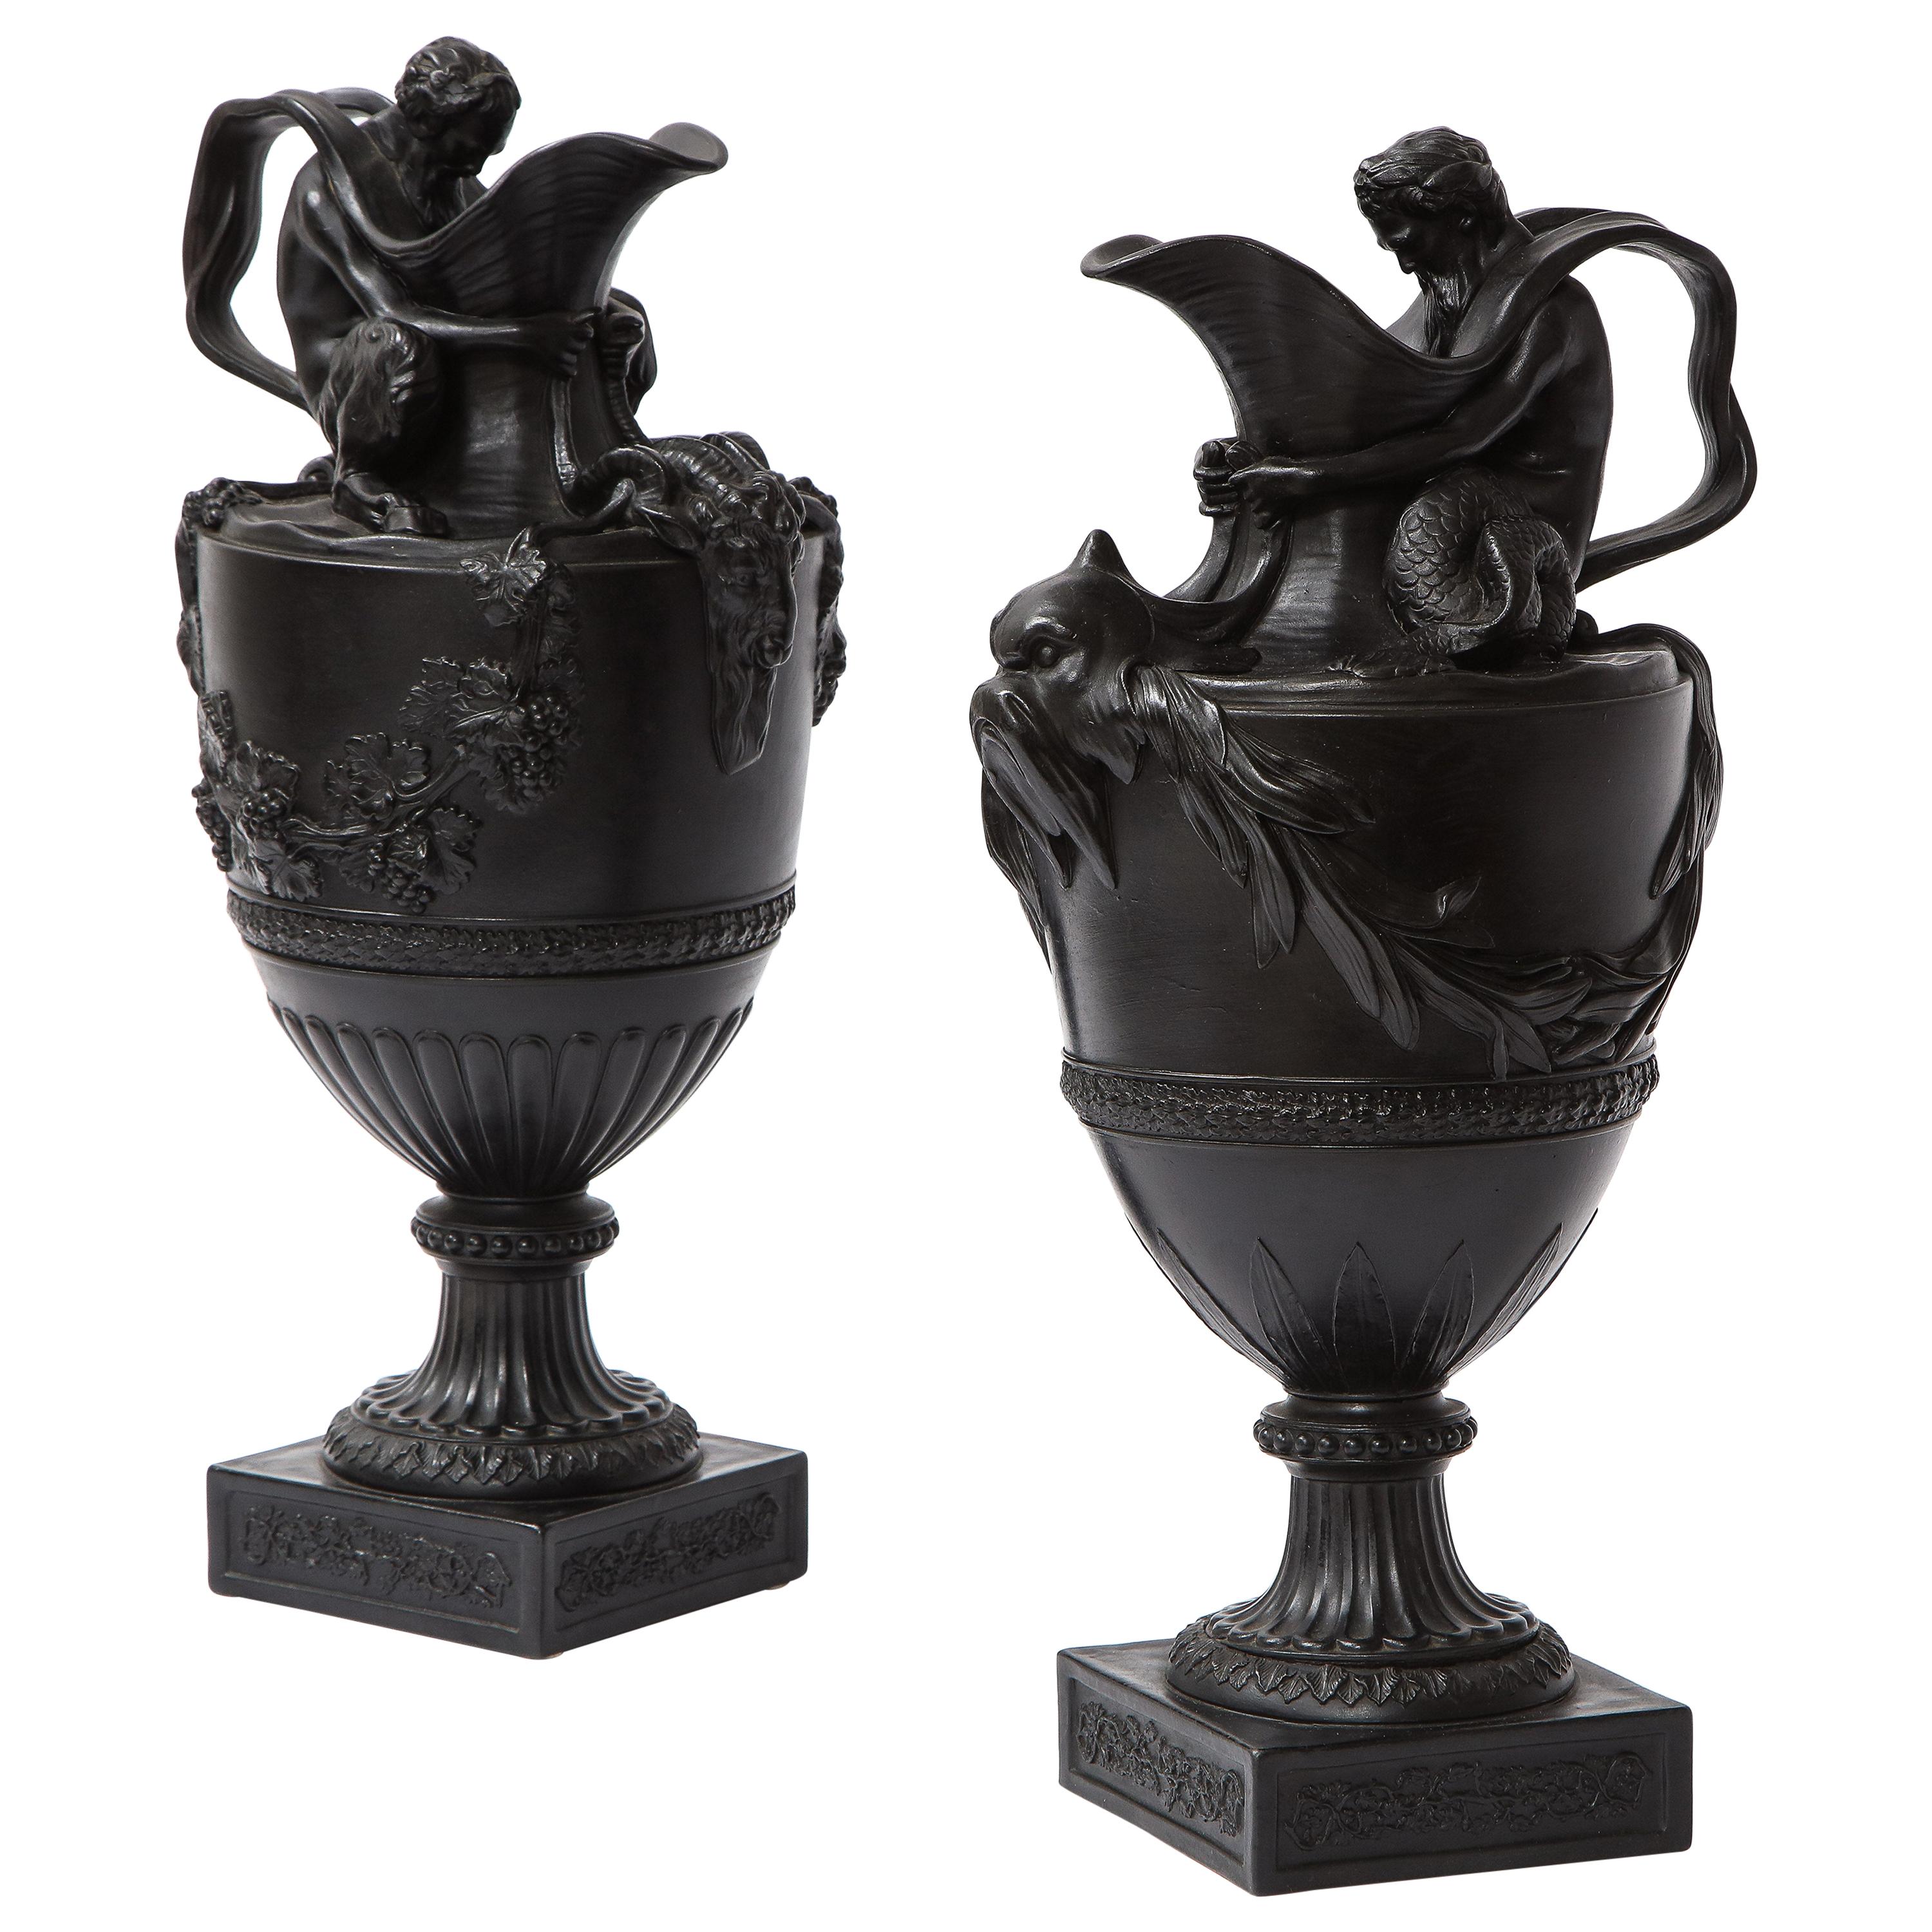 Wedgwood Pair - 54 For Sale on 1stDibs